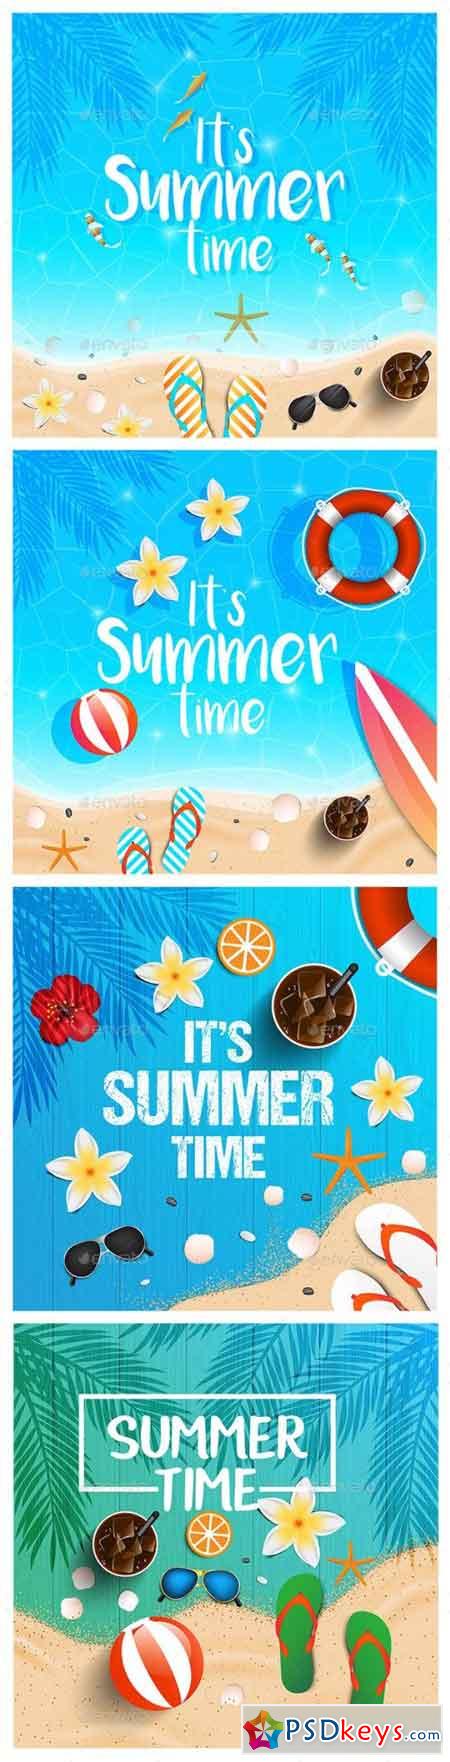 Summer Time Background 22121123